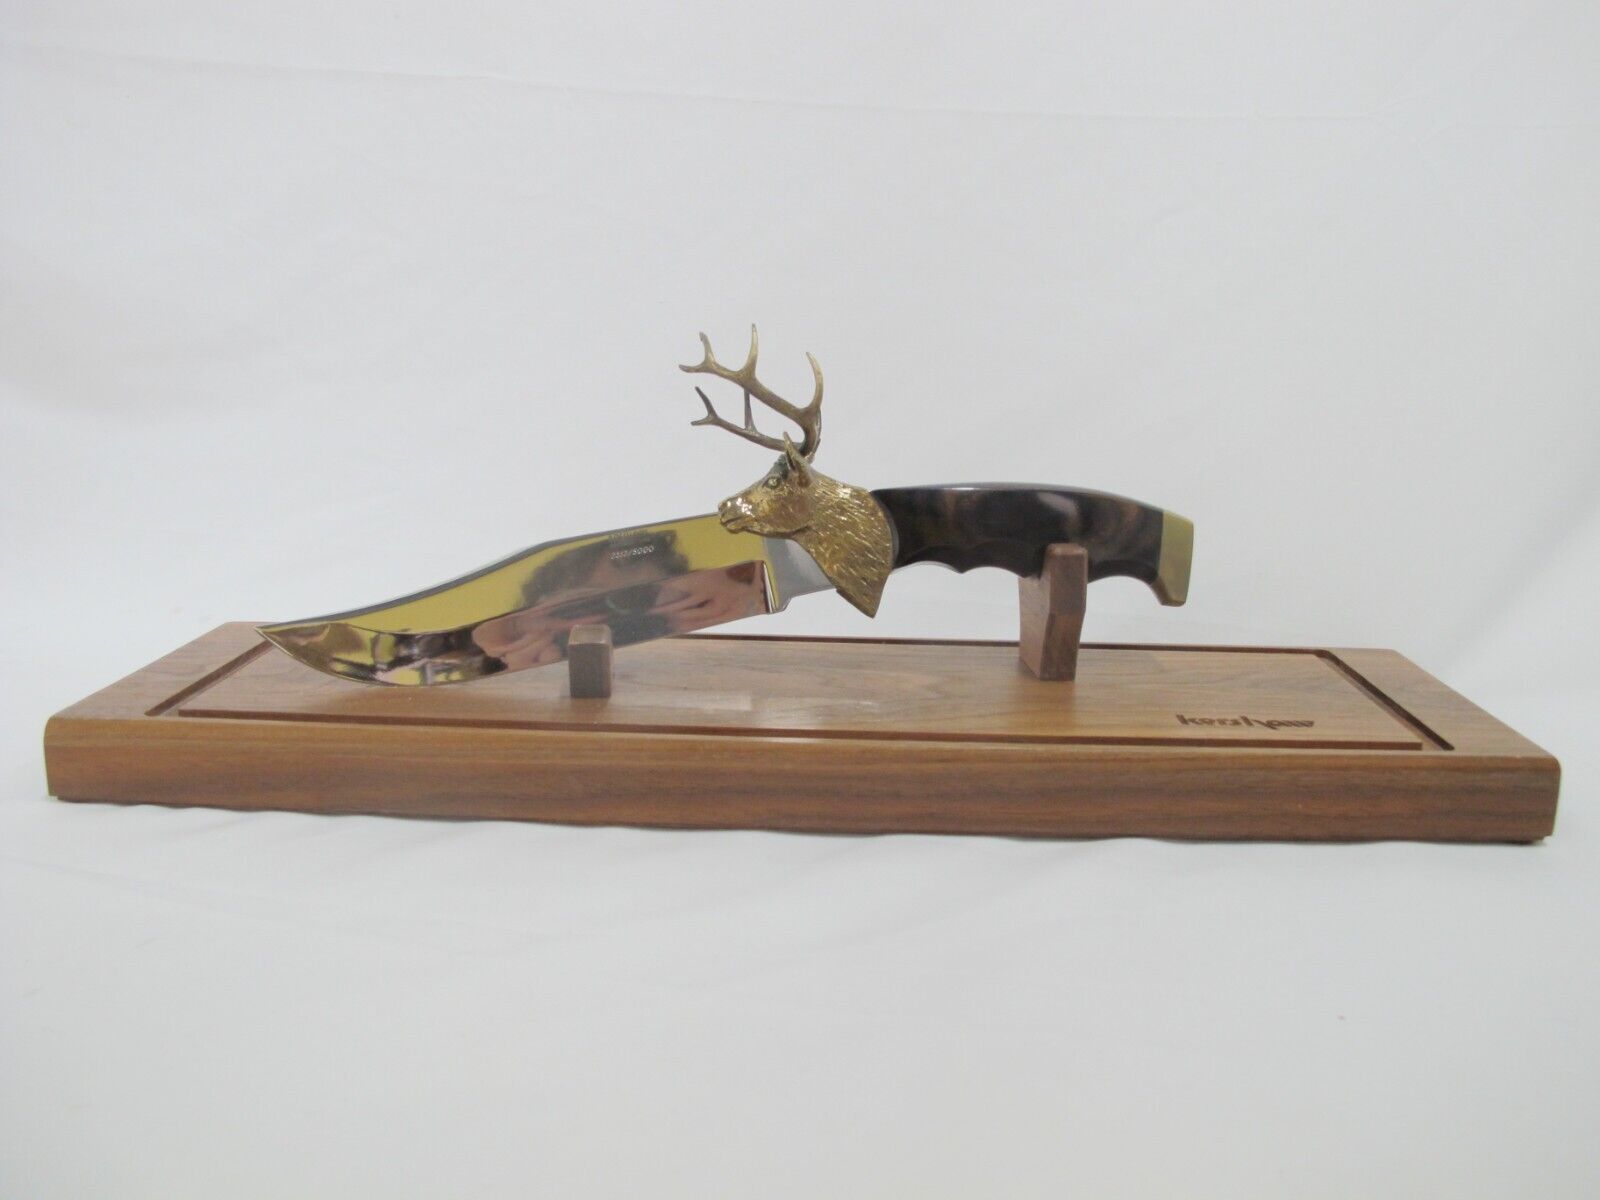 KERSHAW White Tail DEER Buck Bowie Knife Limited Edition in Display Case